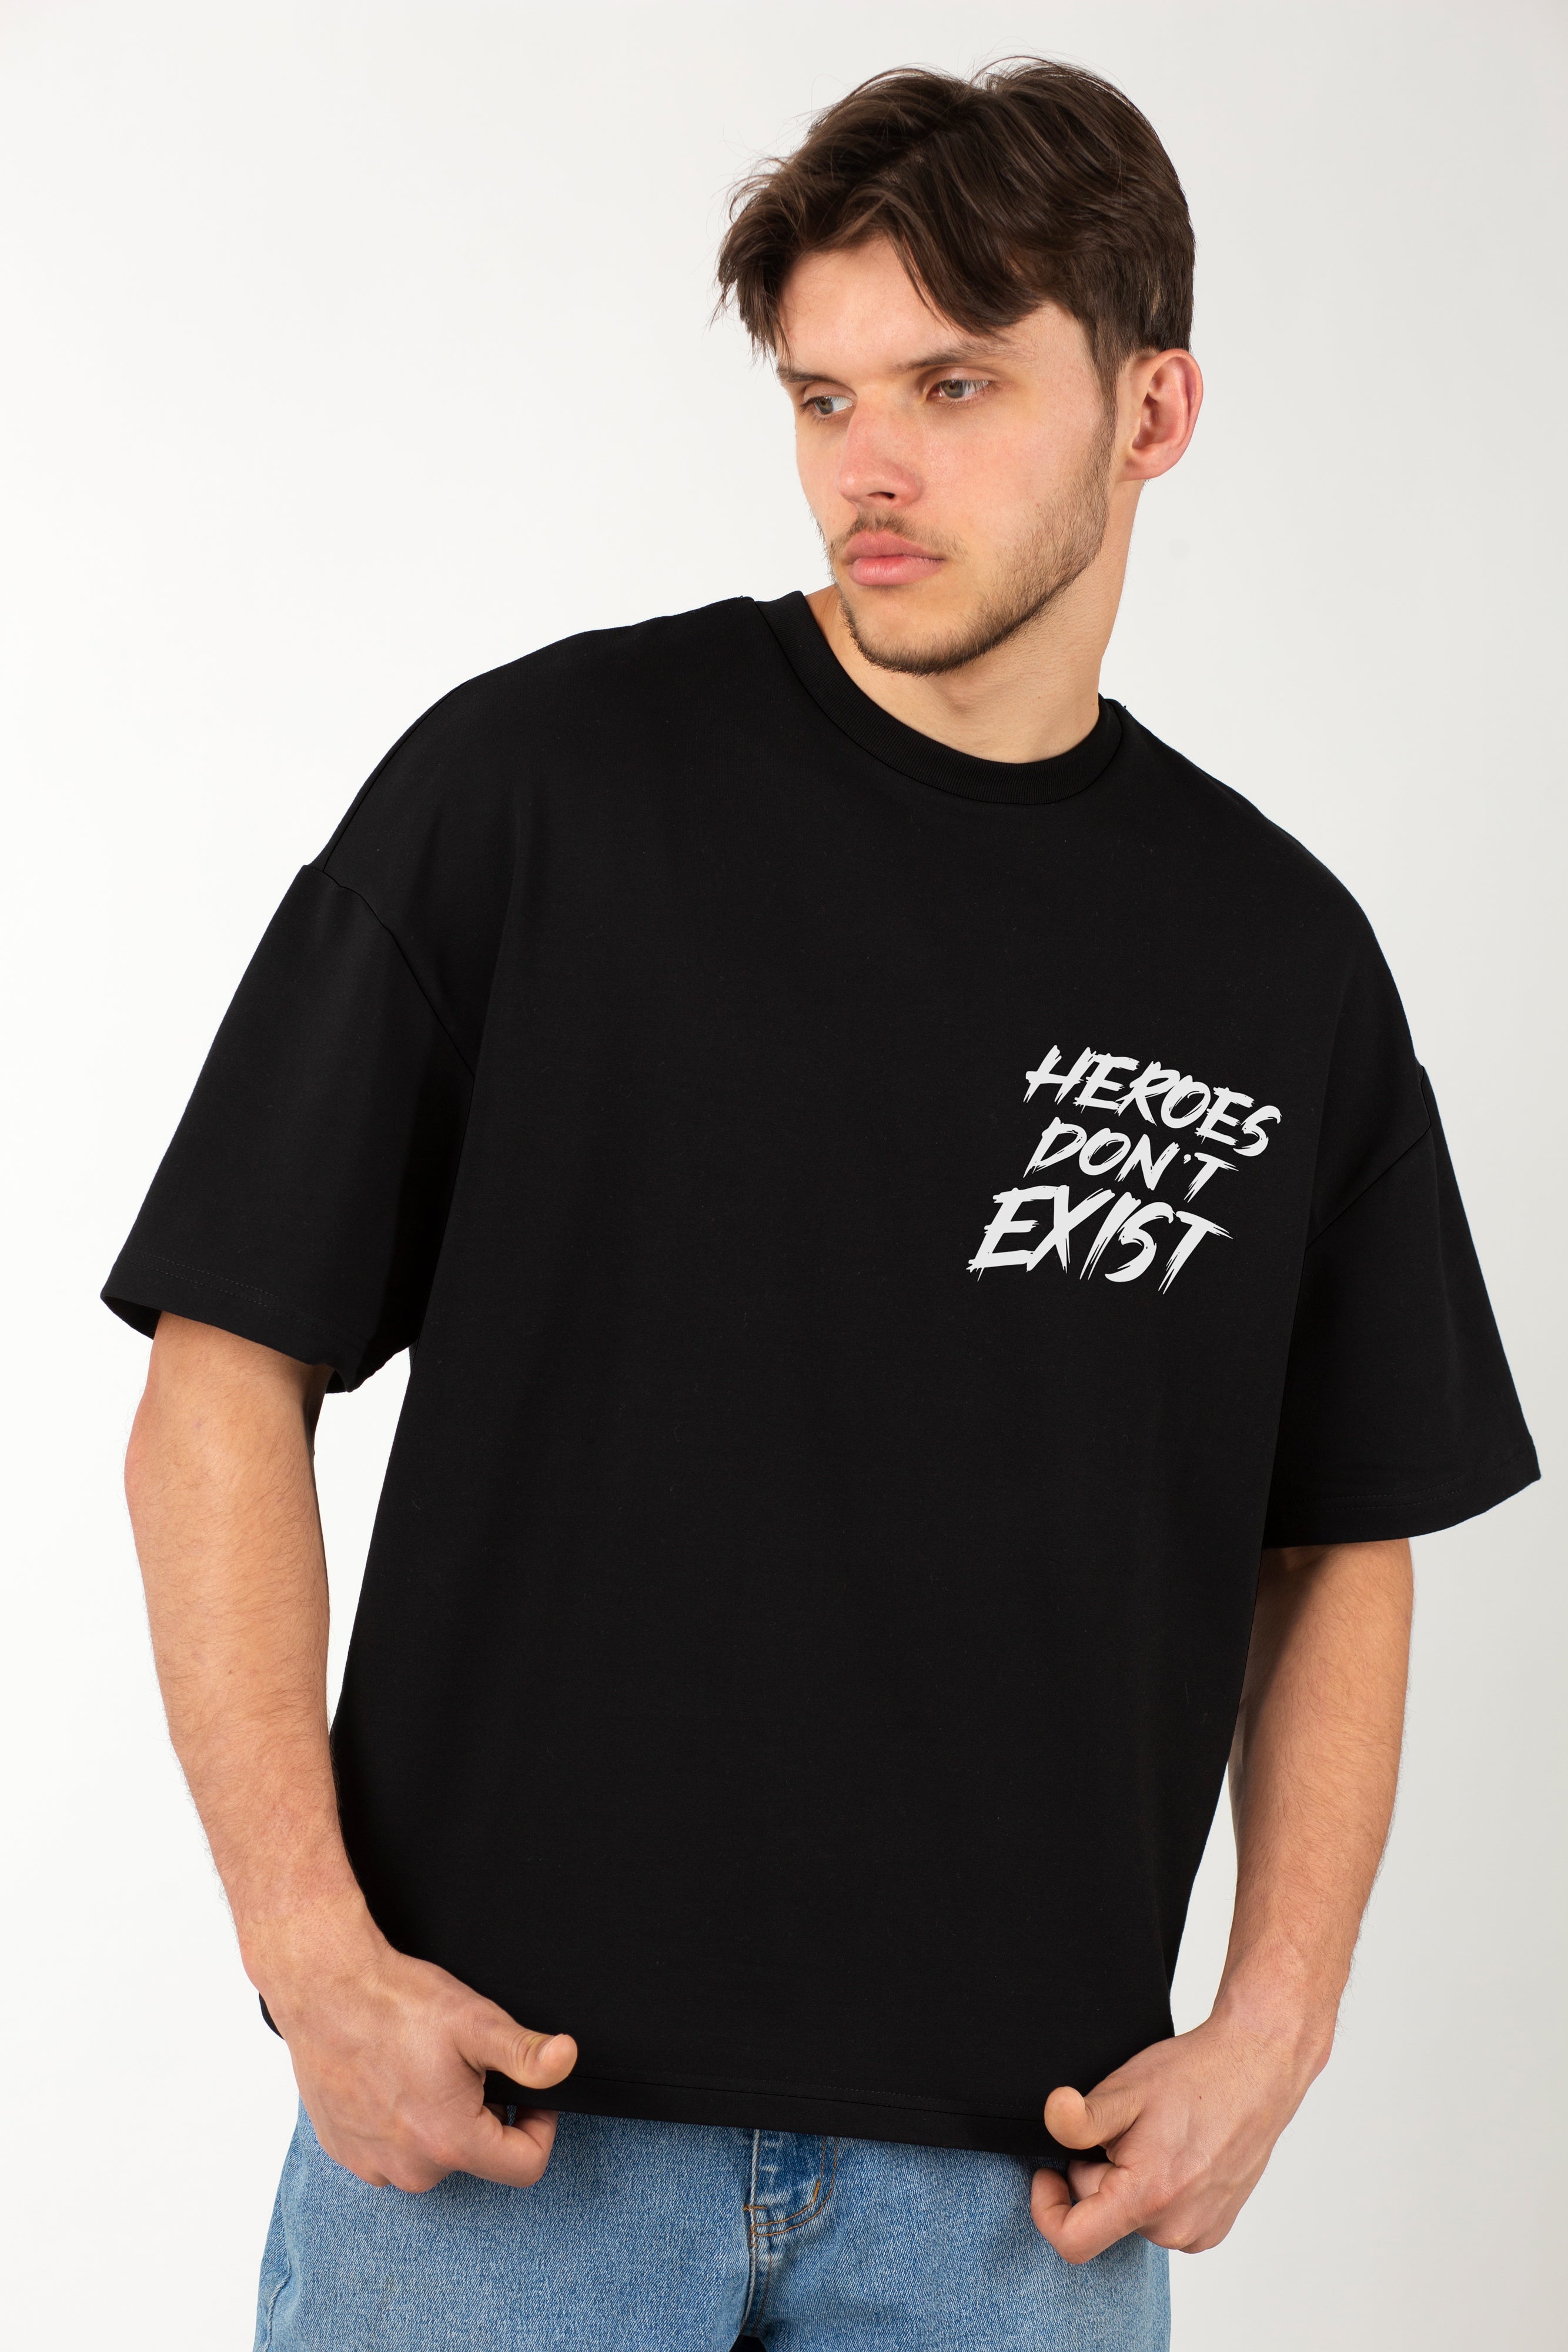 Heroes Don't Exist Oversized T Shirt | Unisex Baggy Tees